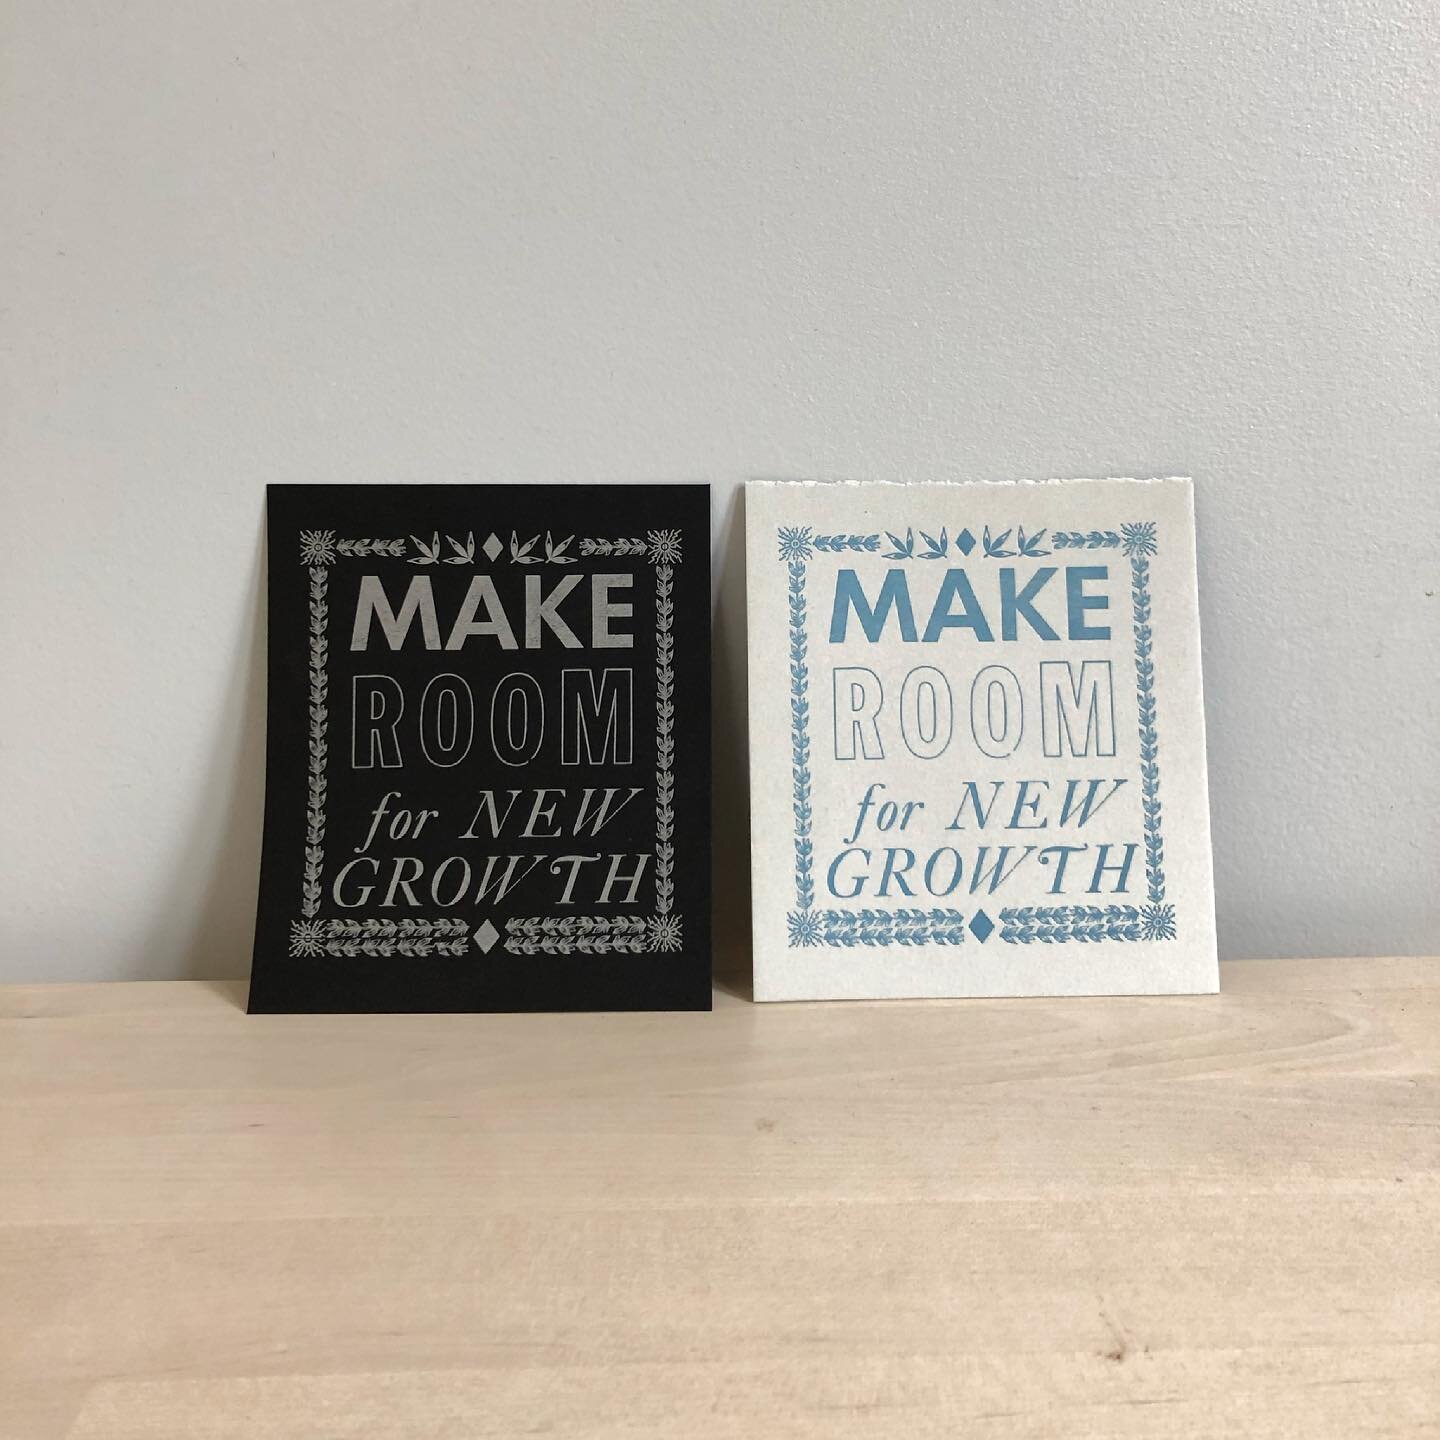 #availablenow 🌿💫 #pickwickcornerstore
.
.
.
4.5&rdquo; x 5&rdquo; letterpress print. Available in blue or silver. 30% of profits go to support @pickwickindependentpress